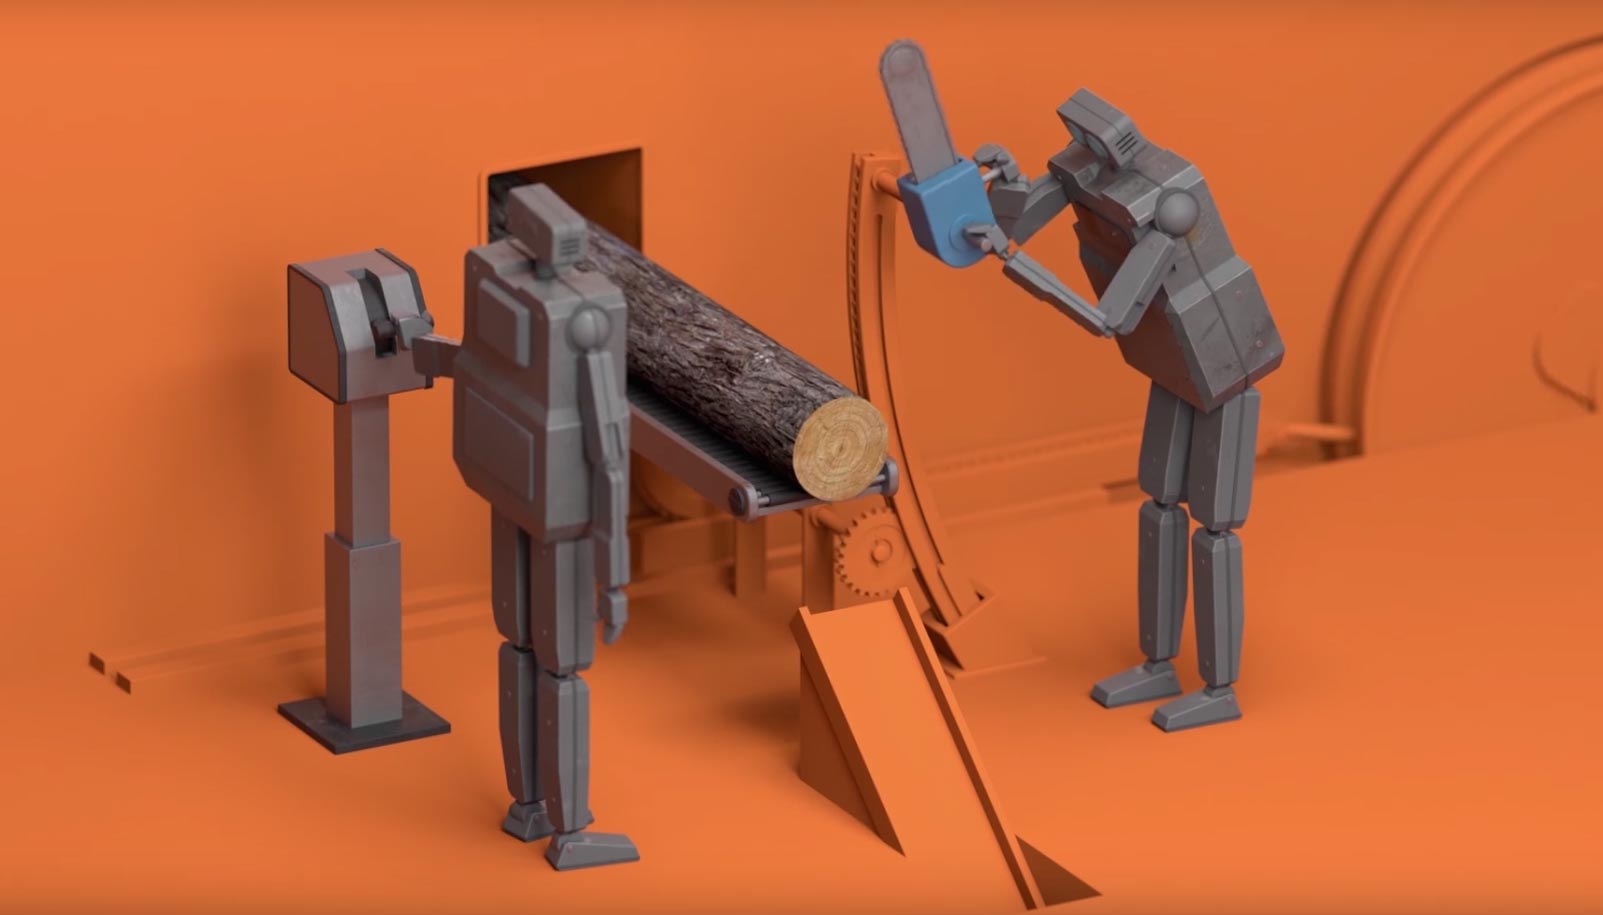 #video of the day | Sad cartoon about the unenviable fate of robotic workaholics